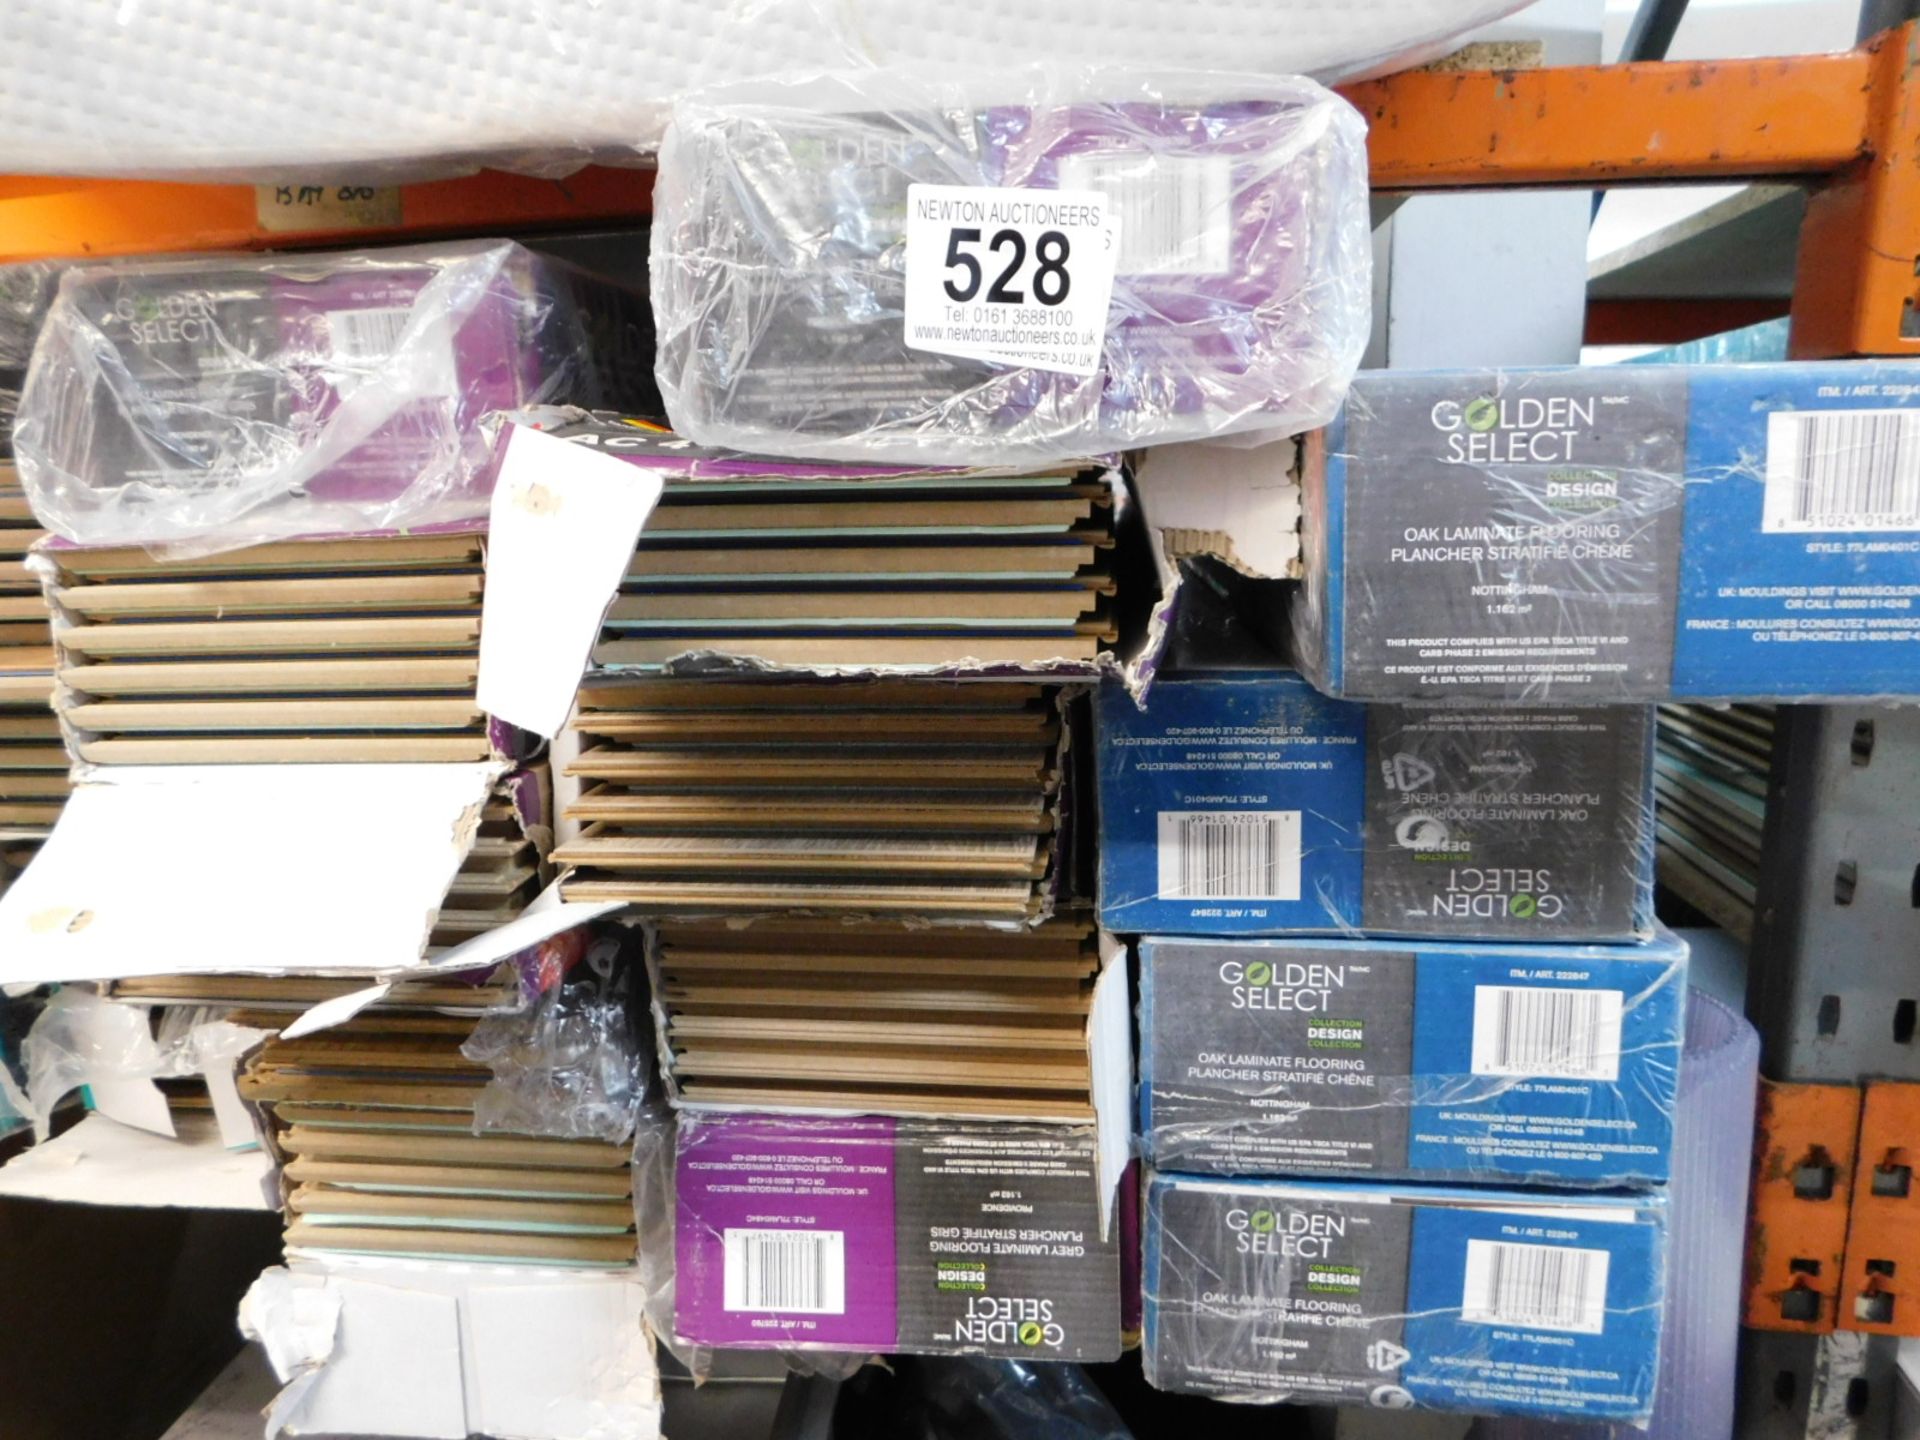 18 BOXES WORTH OF GOLDEN SELECT LAMINATE FLOORING IN NOTTINGHAM COLOUR (COVERS APPROXIMATELY 1.162m2